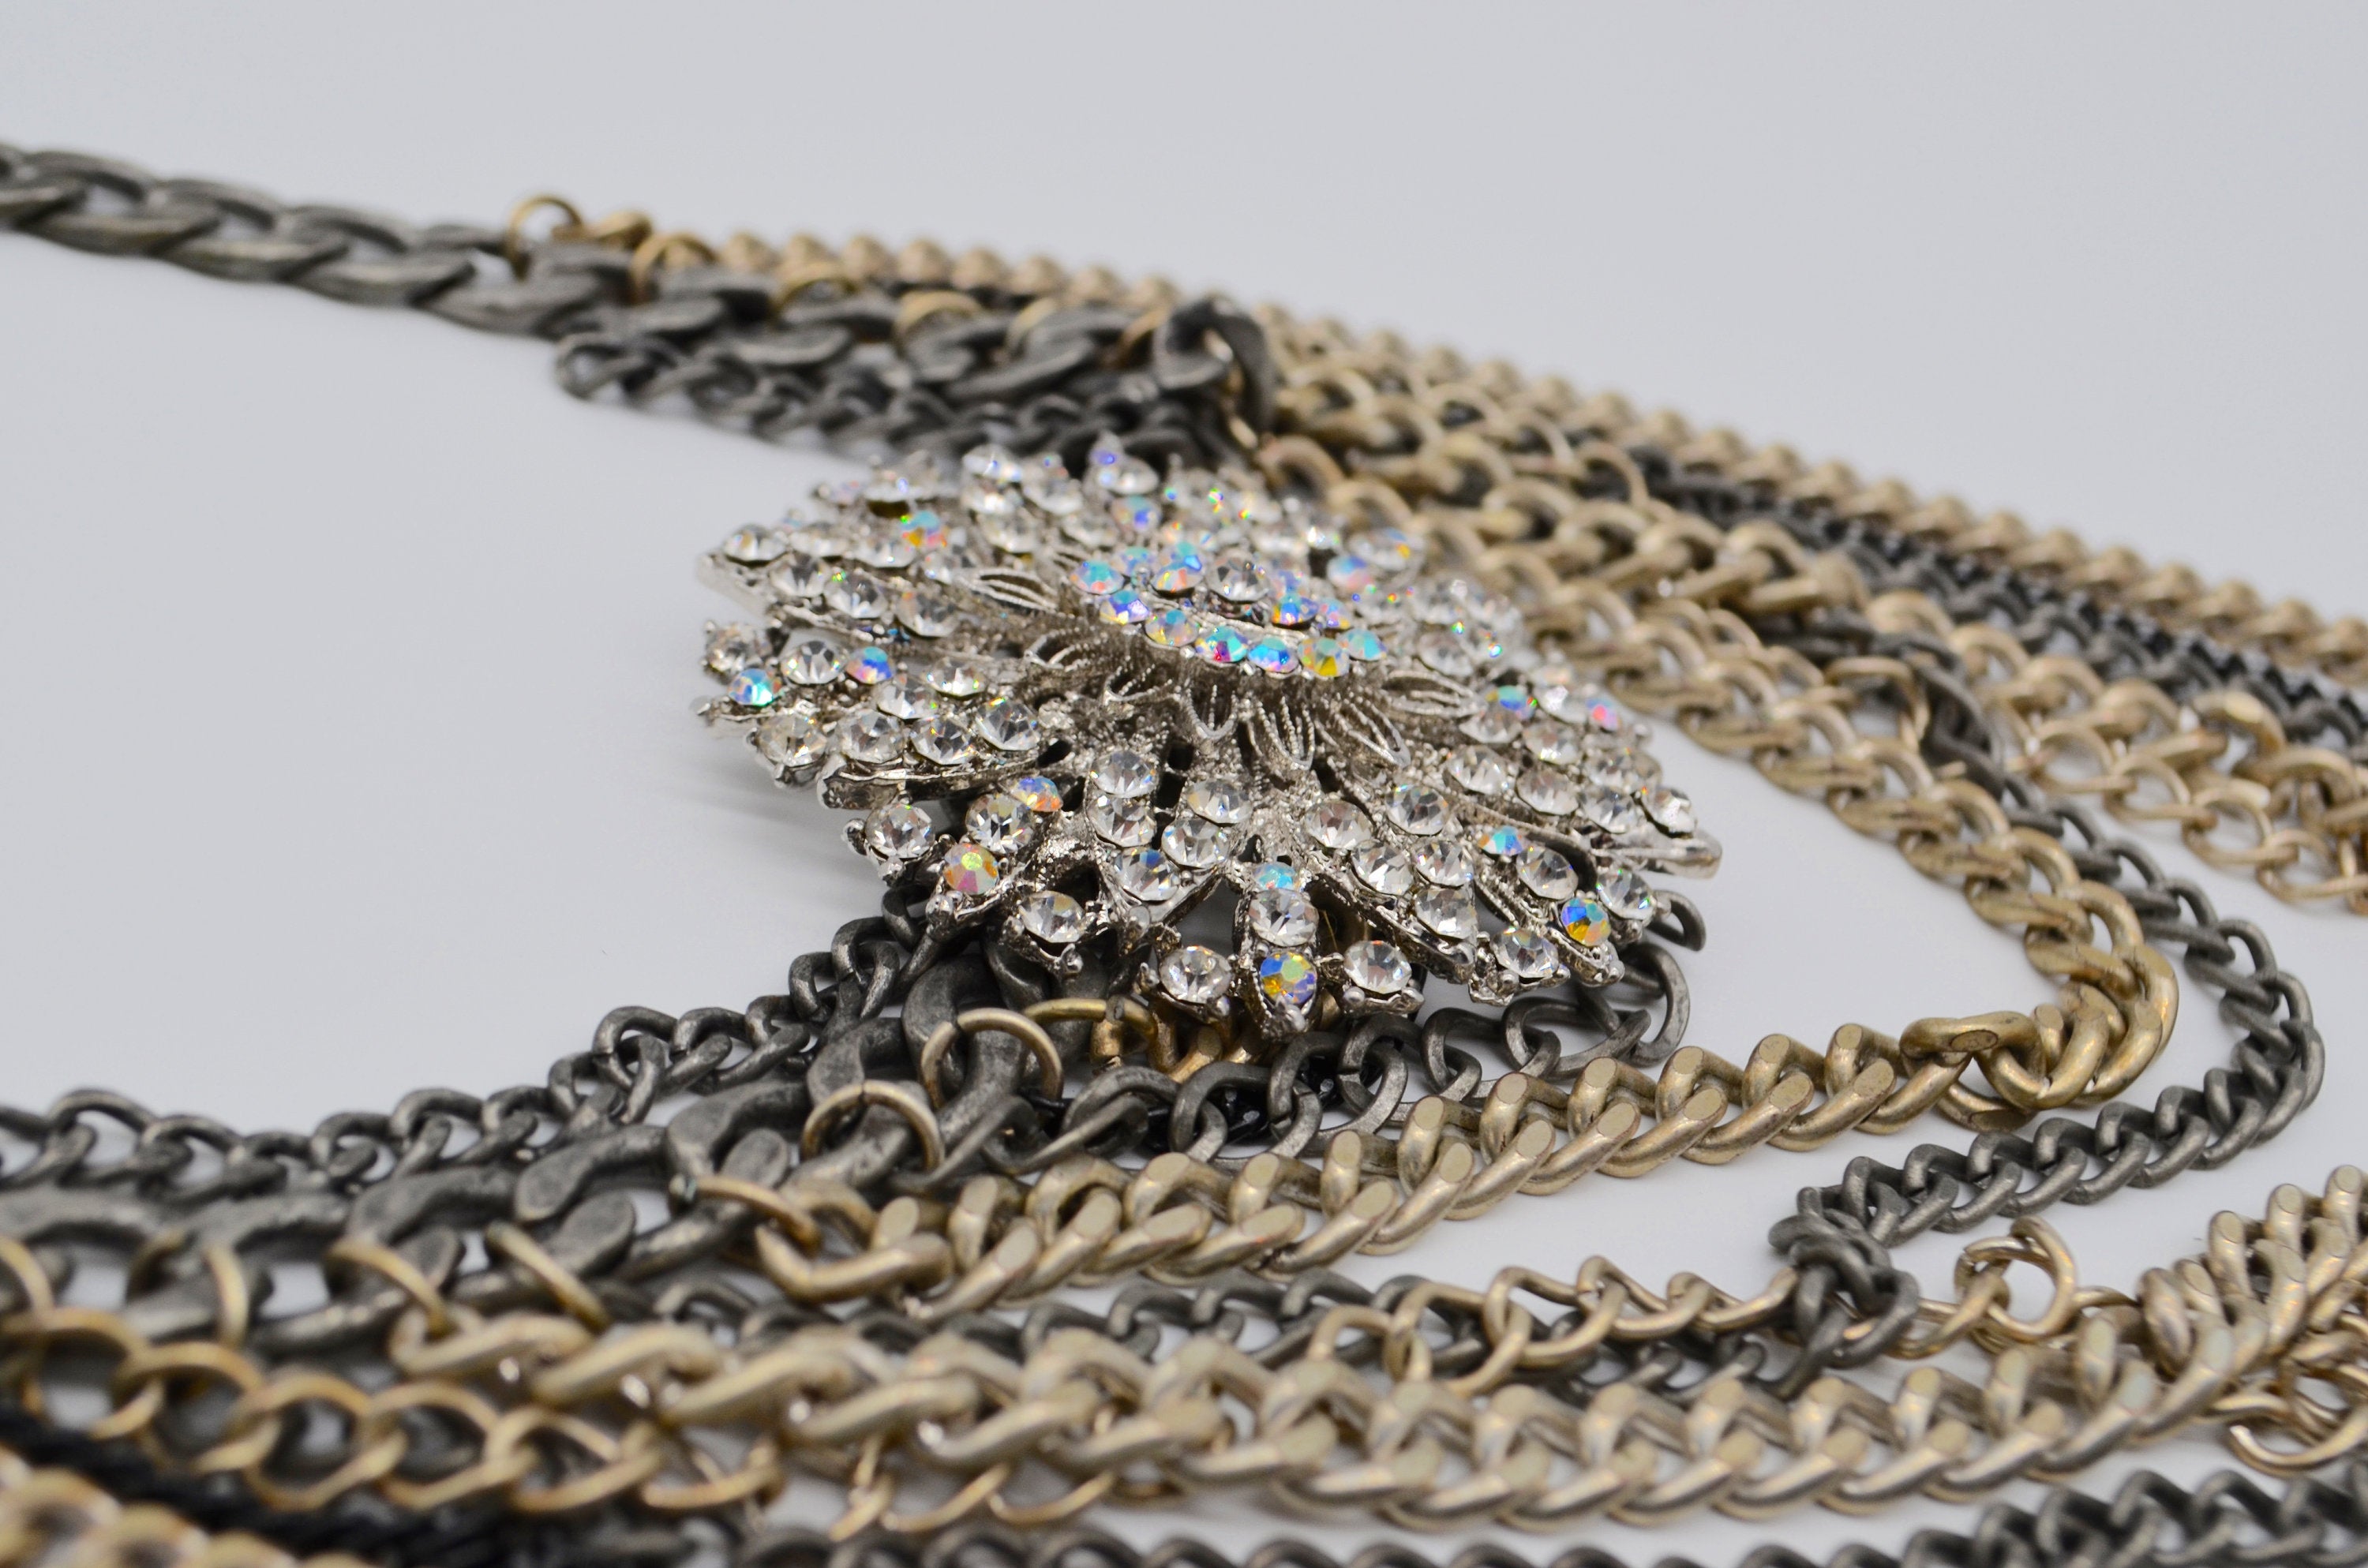 Statement Multi Layered Lengths Of Chain Antique Silver Necklace With Filigree Brooch Rockstar